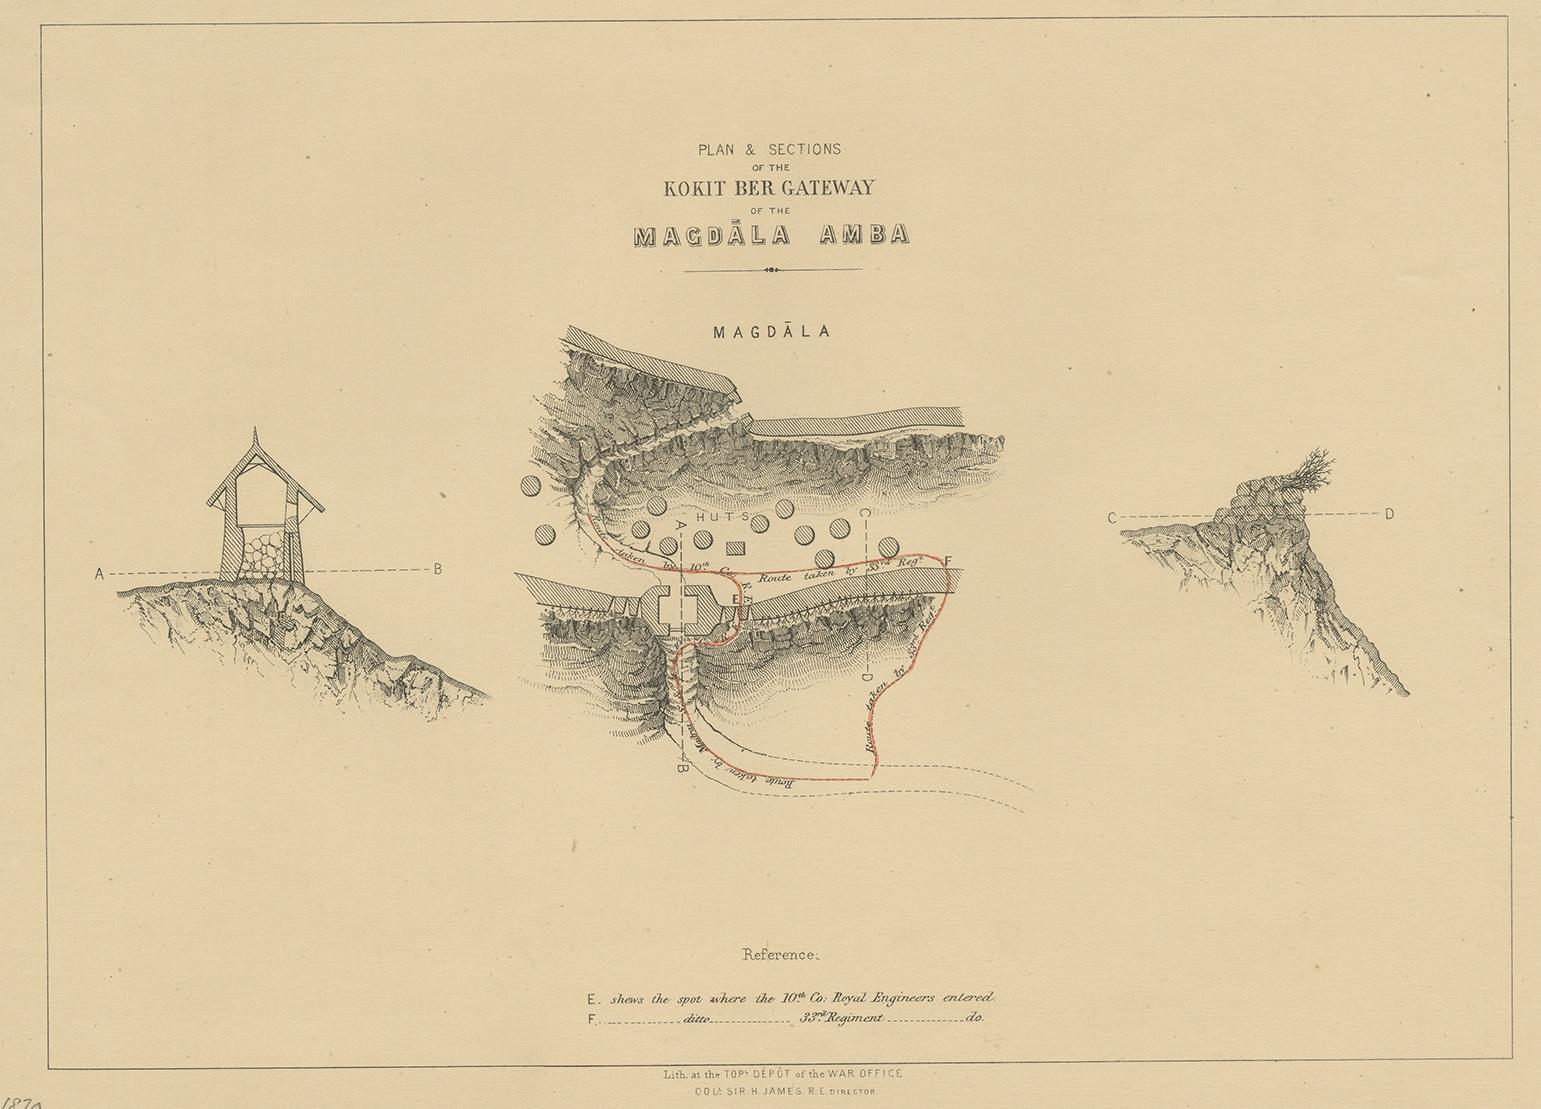 Antique print titled 'Plan & Sections of the Kokit Ber Gateway of the Magdala Amba'. Lithograph of the Koket-Bir gateway, which was the main gateway of the Battle of Magdala. The Battle of Magdala was the conclusion of the British Expedition to